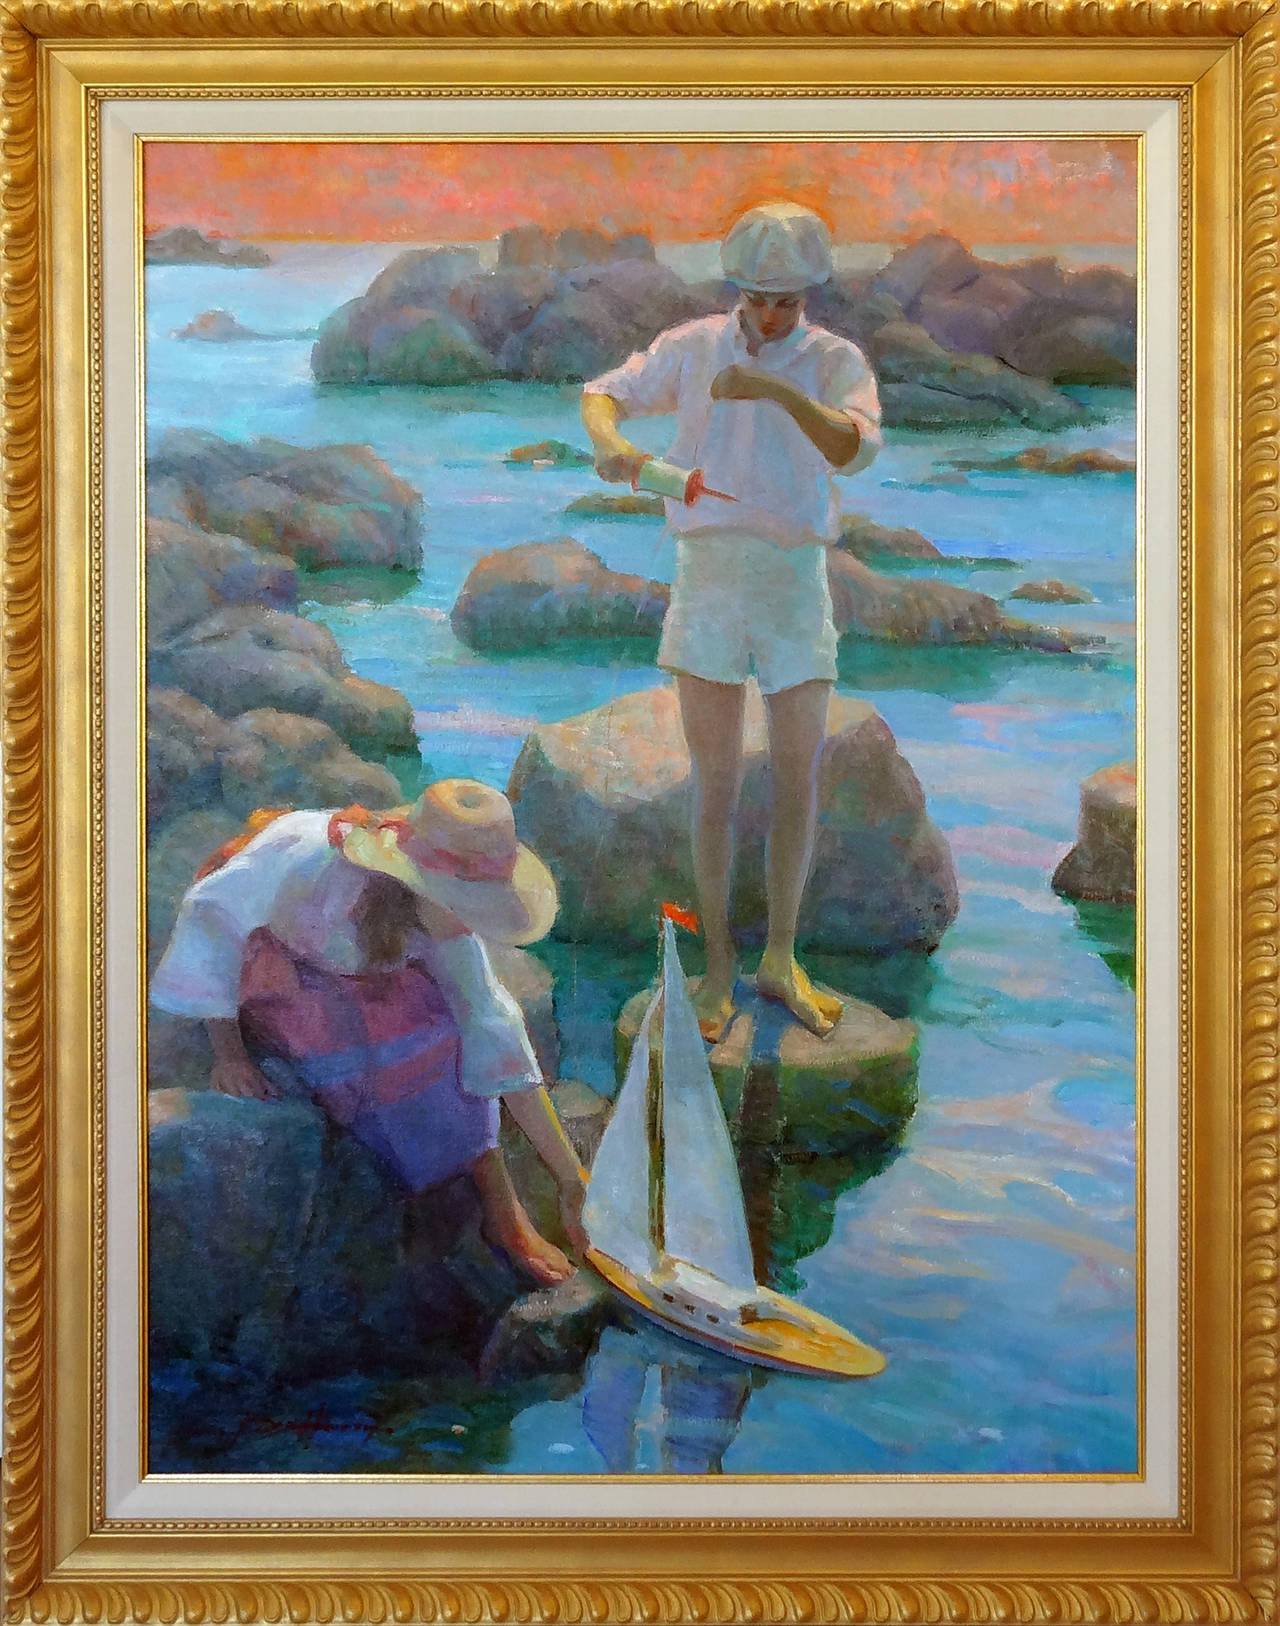 Summer Dreams - Painting by Don Hatfield